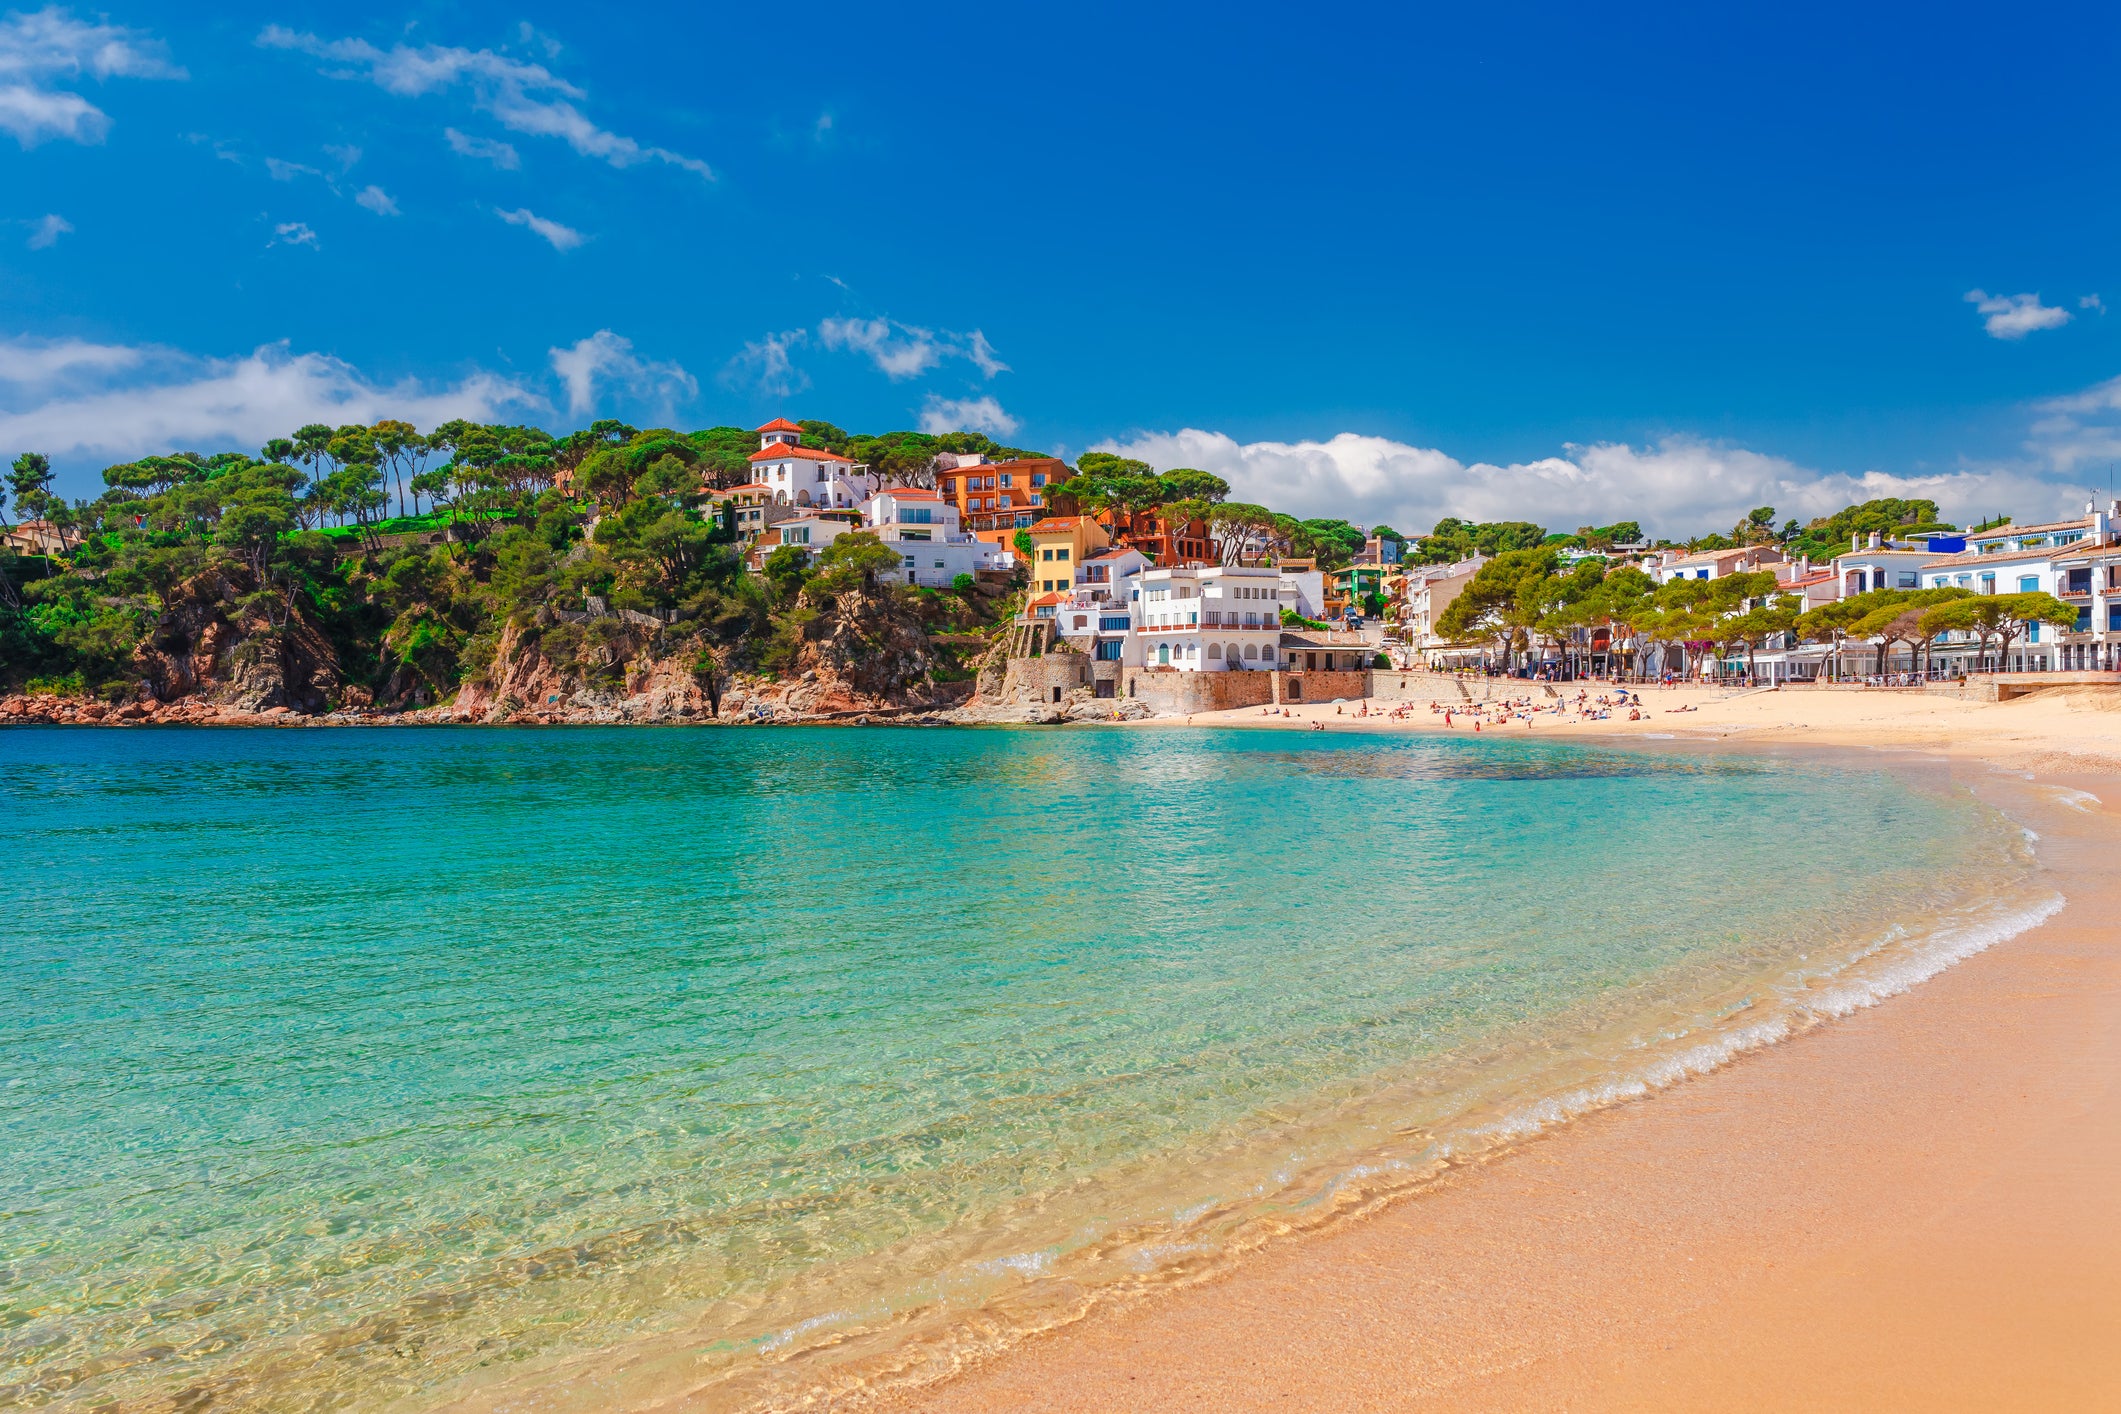 Tourists aren't as tempted as they once were by beach resorts like the Costa Brava